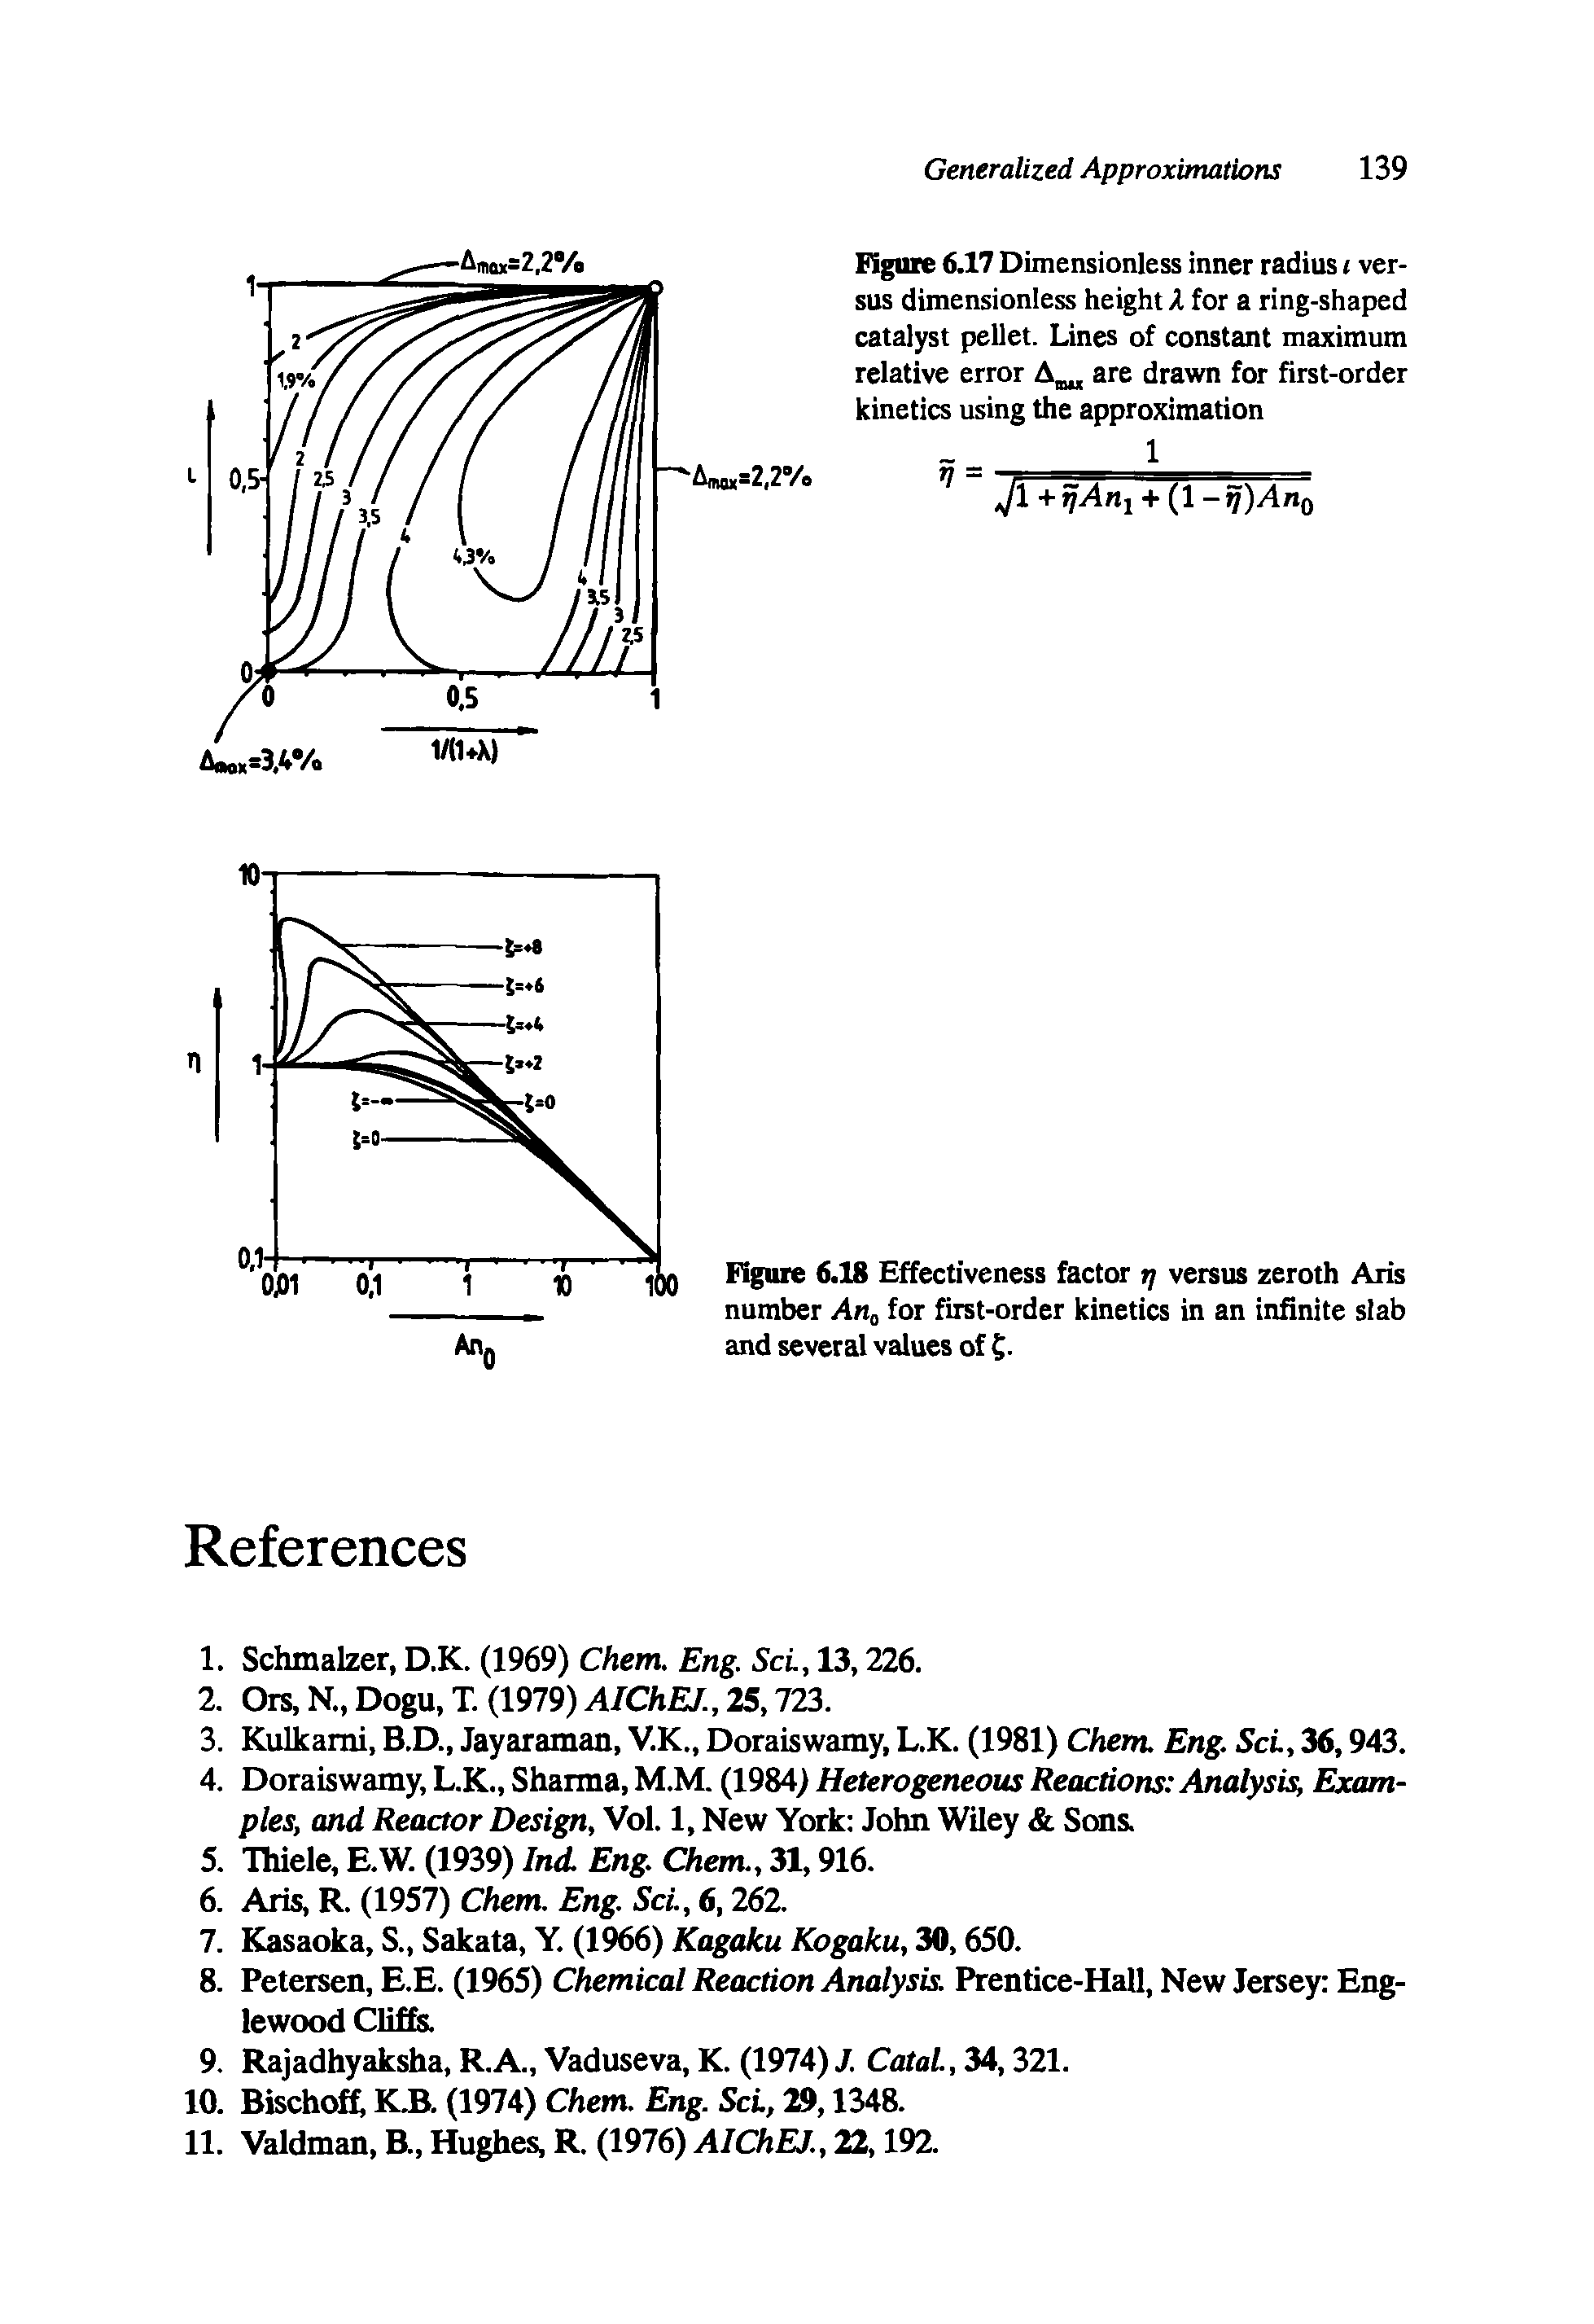 Figure 6.18 Effectiveness factor t] versus zeroth Aris number An0 for first-order kinetics in an infinite slab and several values of .